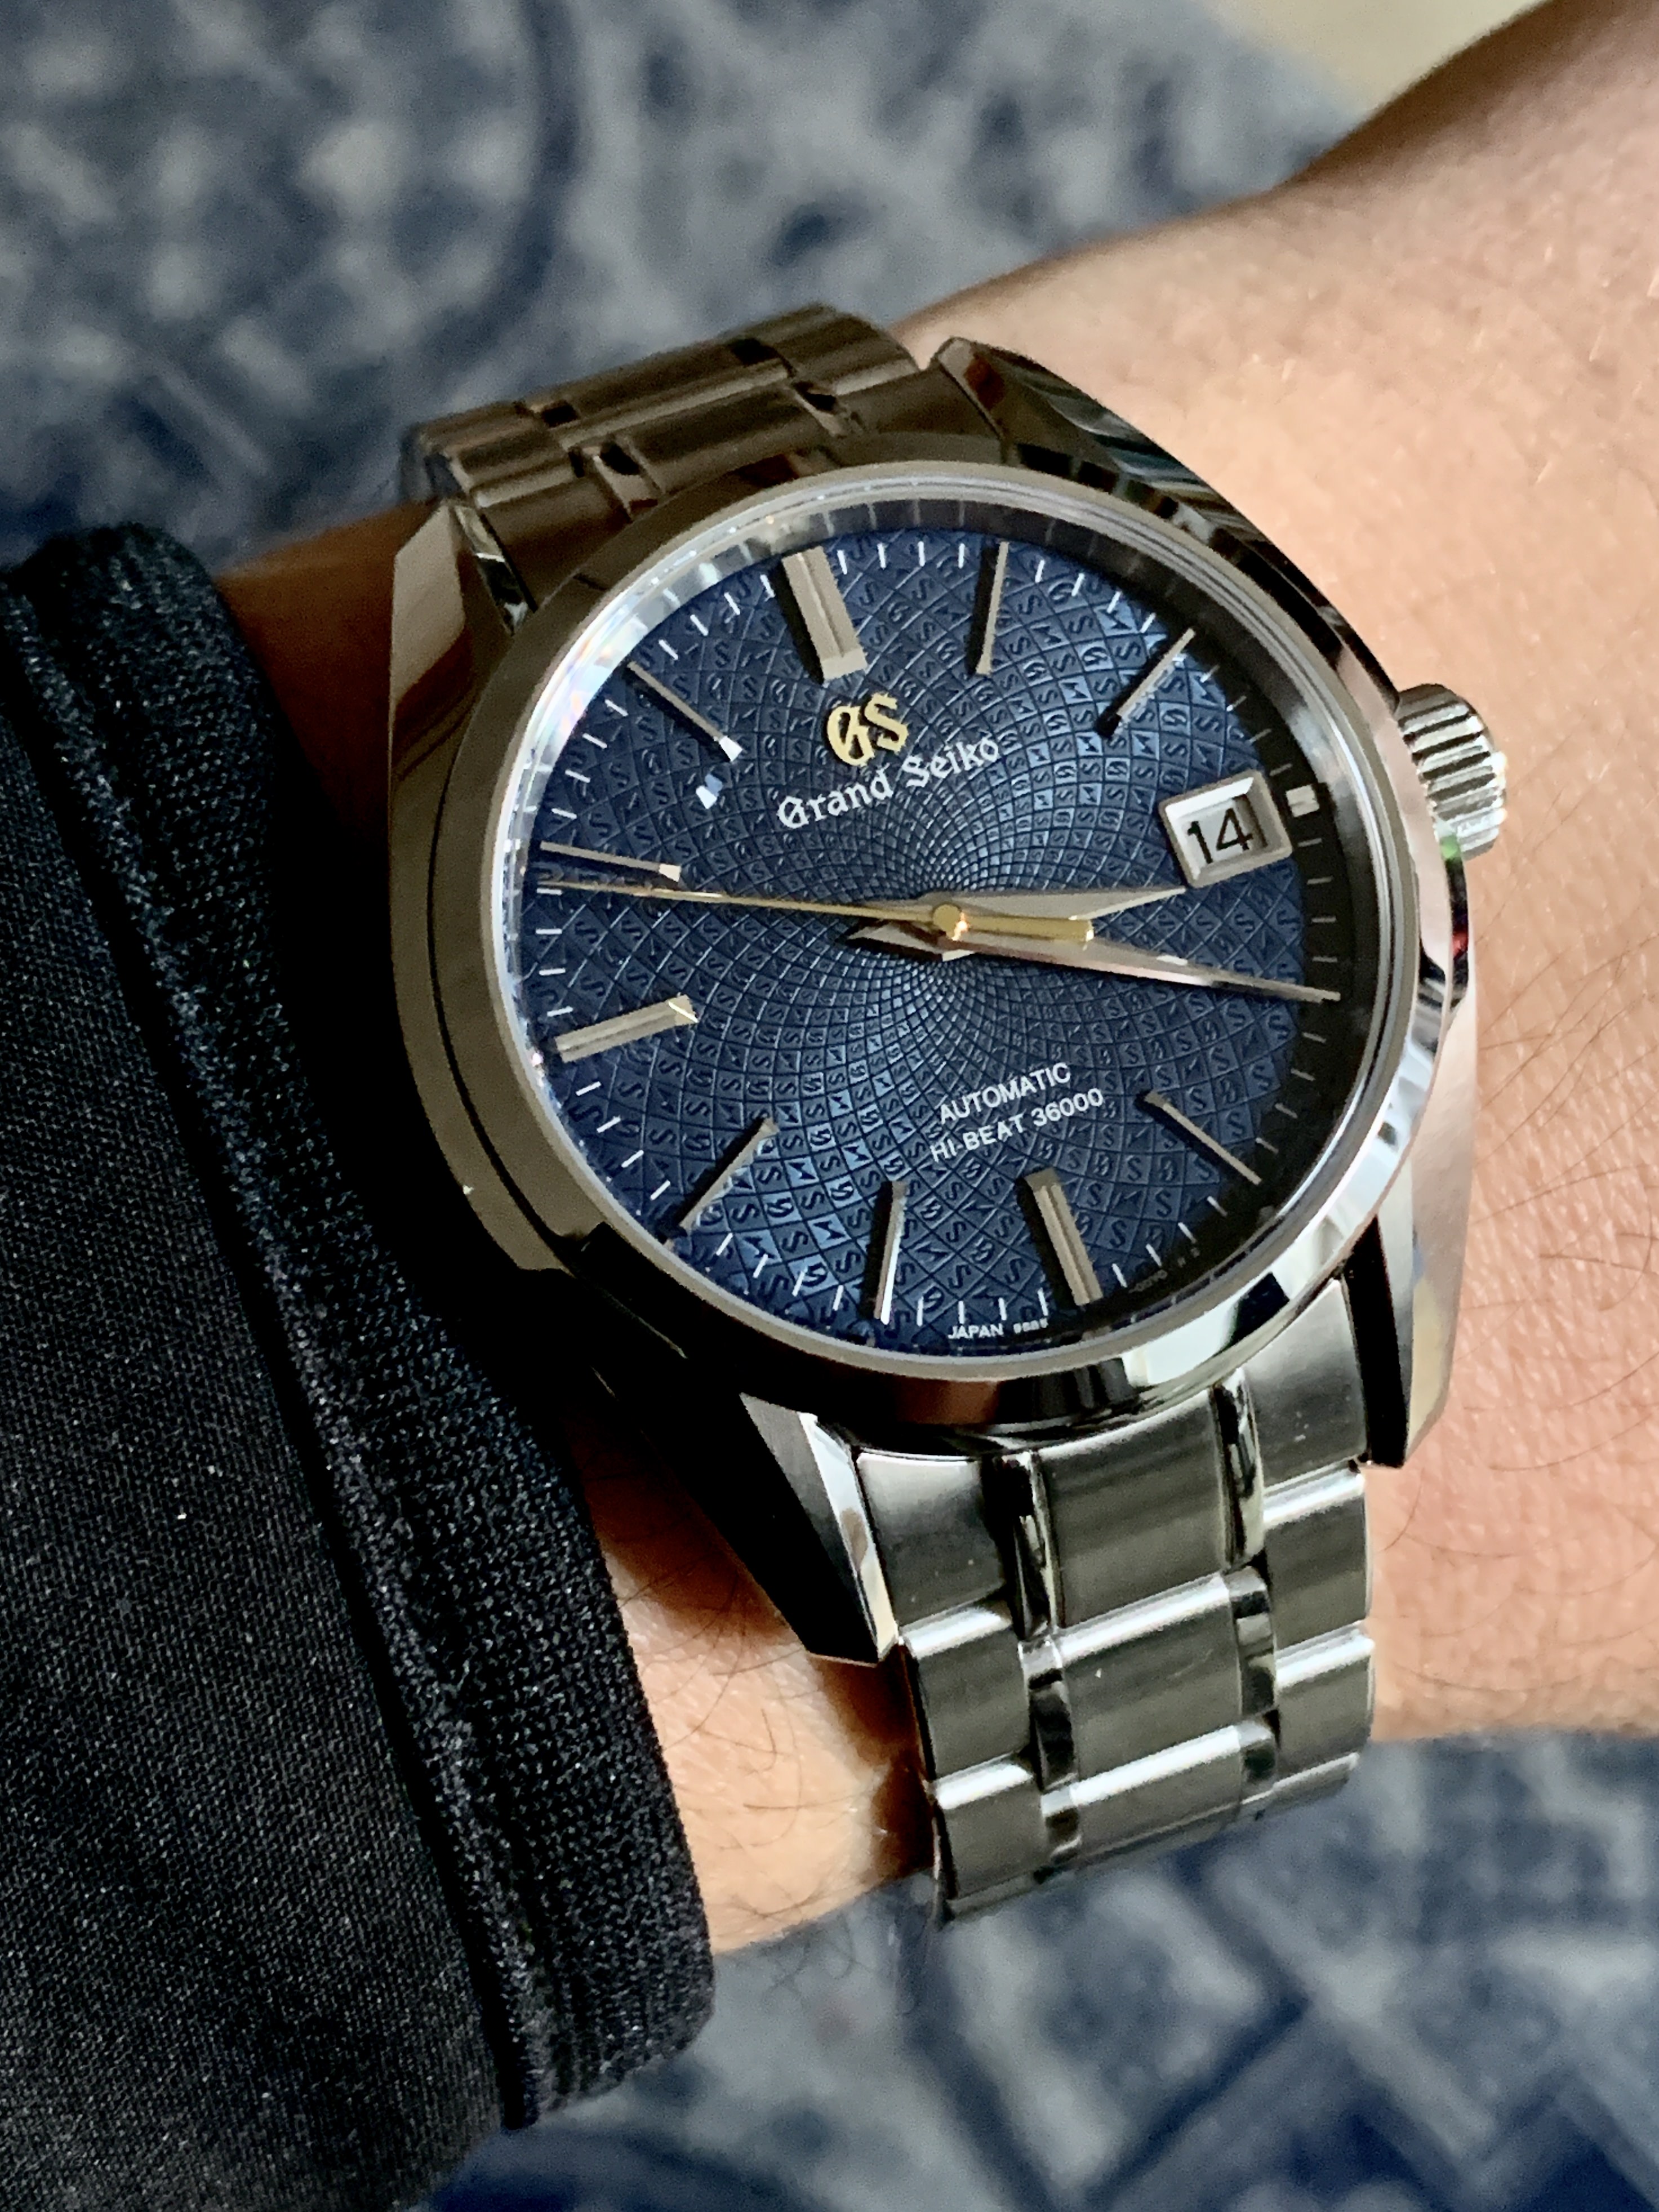 WTS] Grand Seiko SBGH267 - 20th Anniversary Limited Edition | WatchCharts